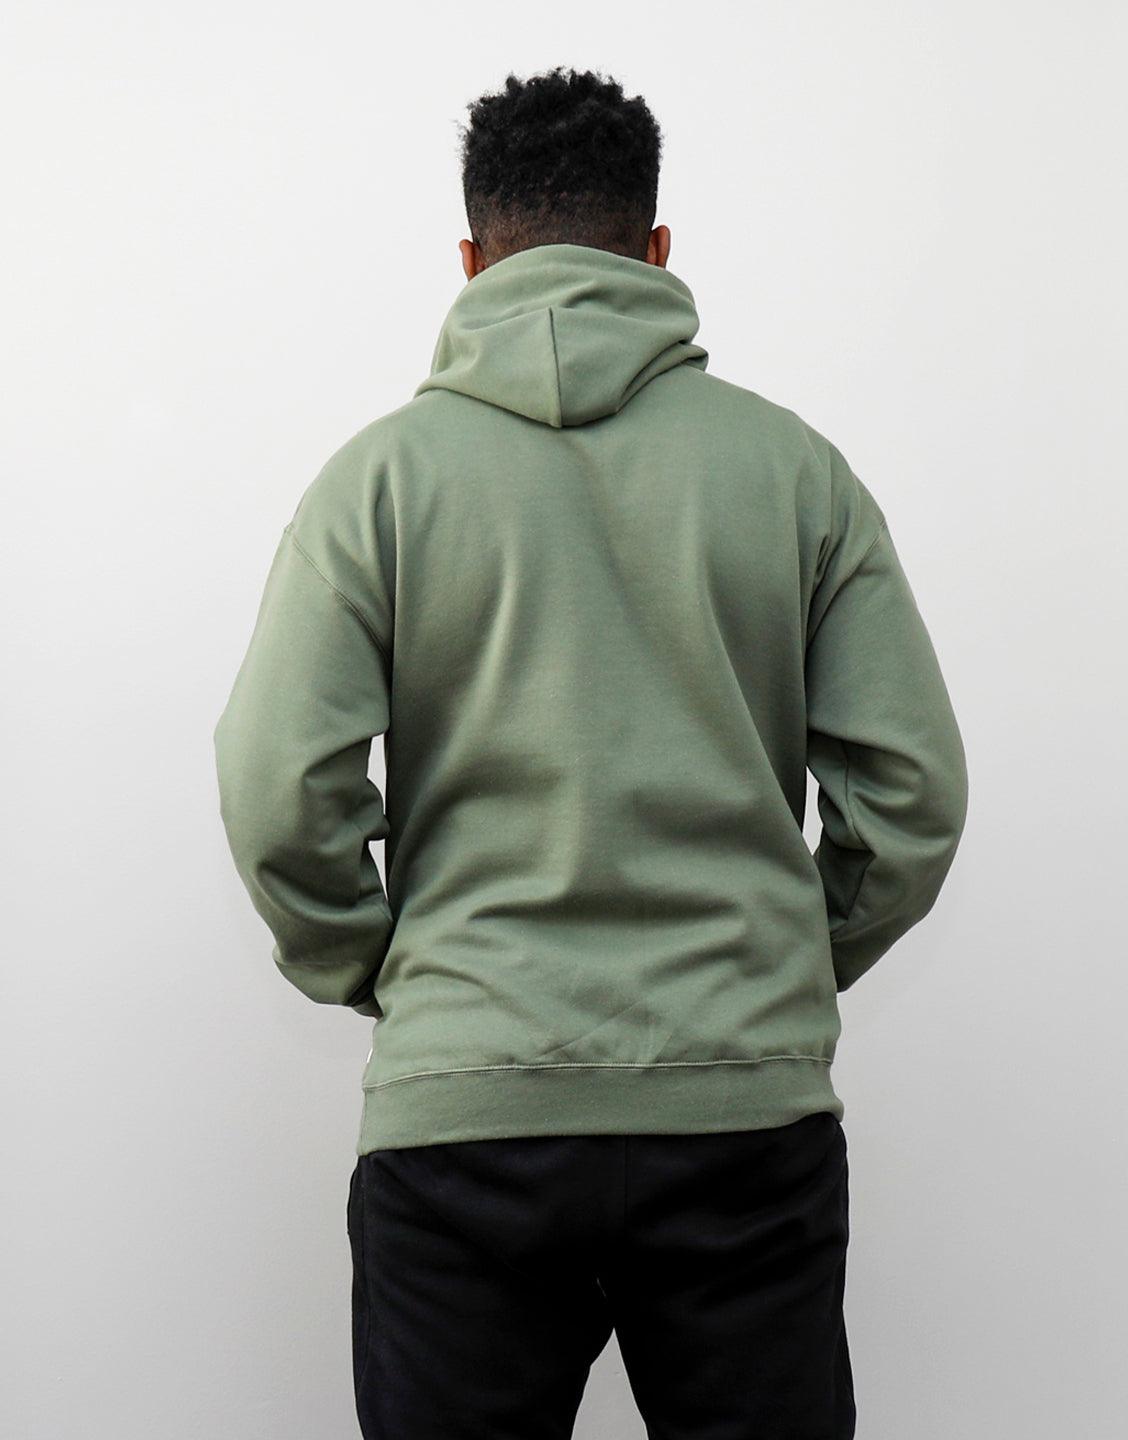 Victory Hoodie - Military Green - VOTC Clothing